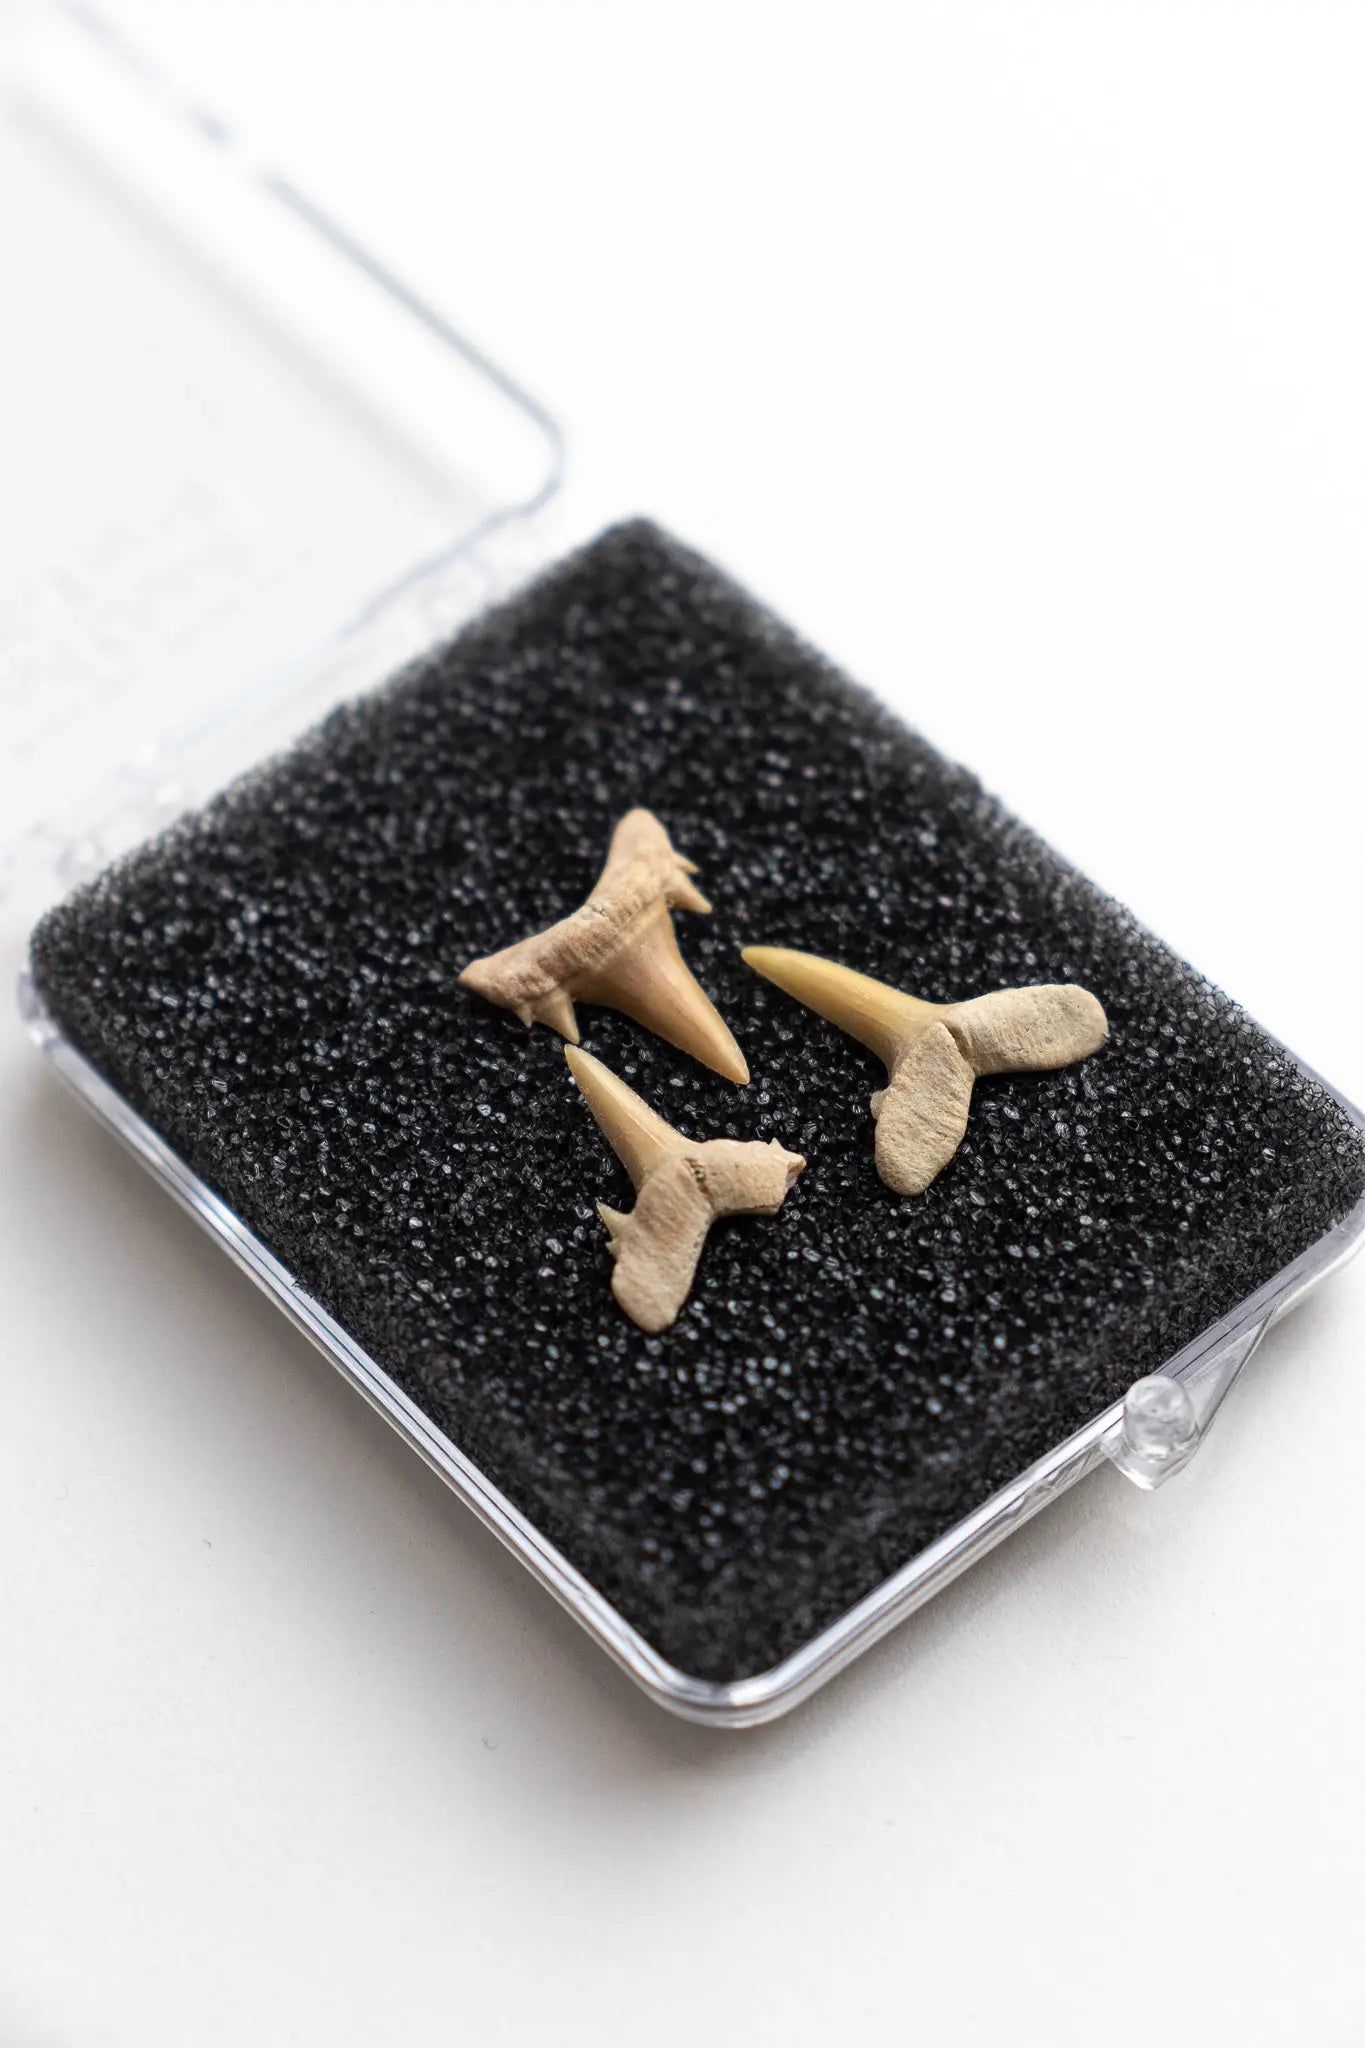 Sand Shark Tooth Fossil - Stemcell Science Shop